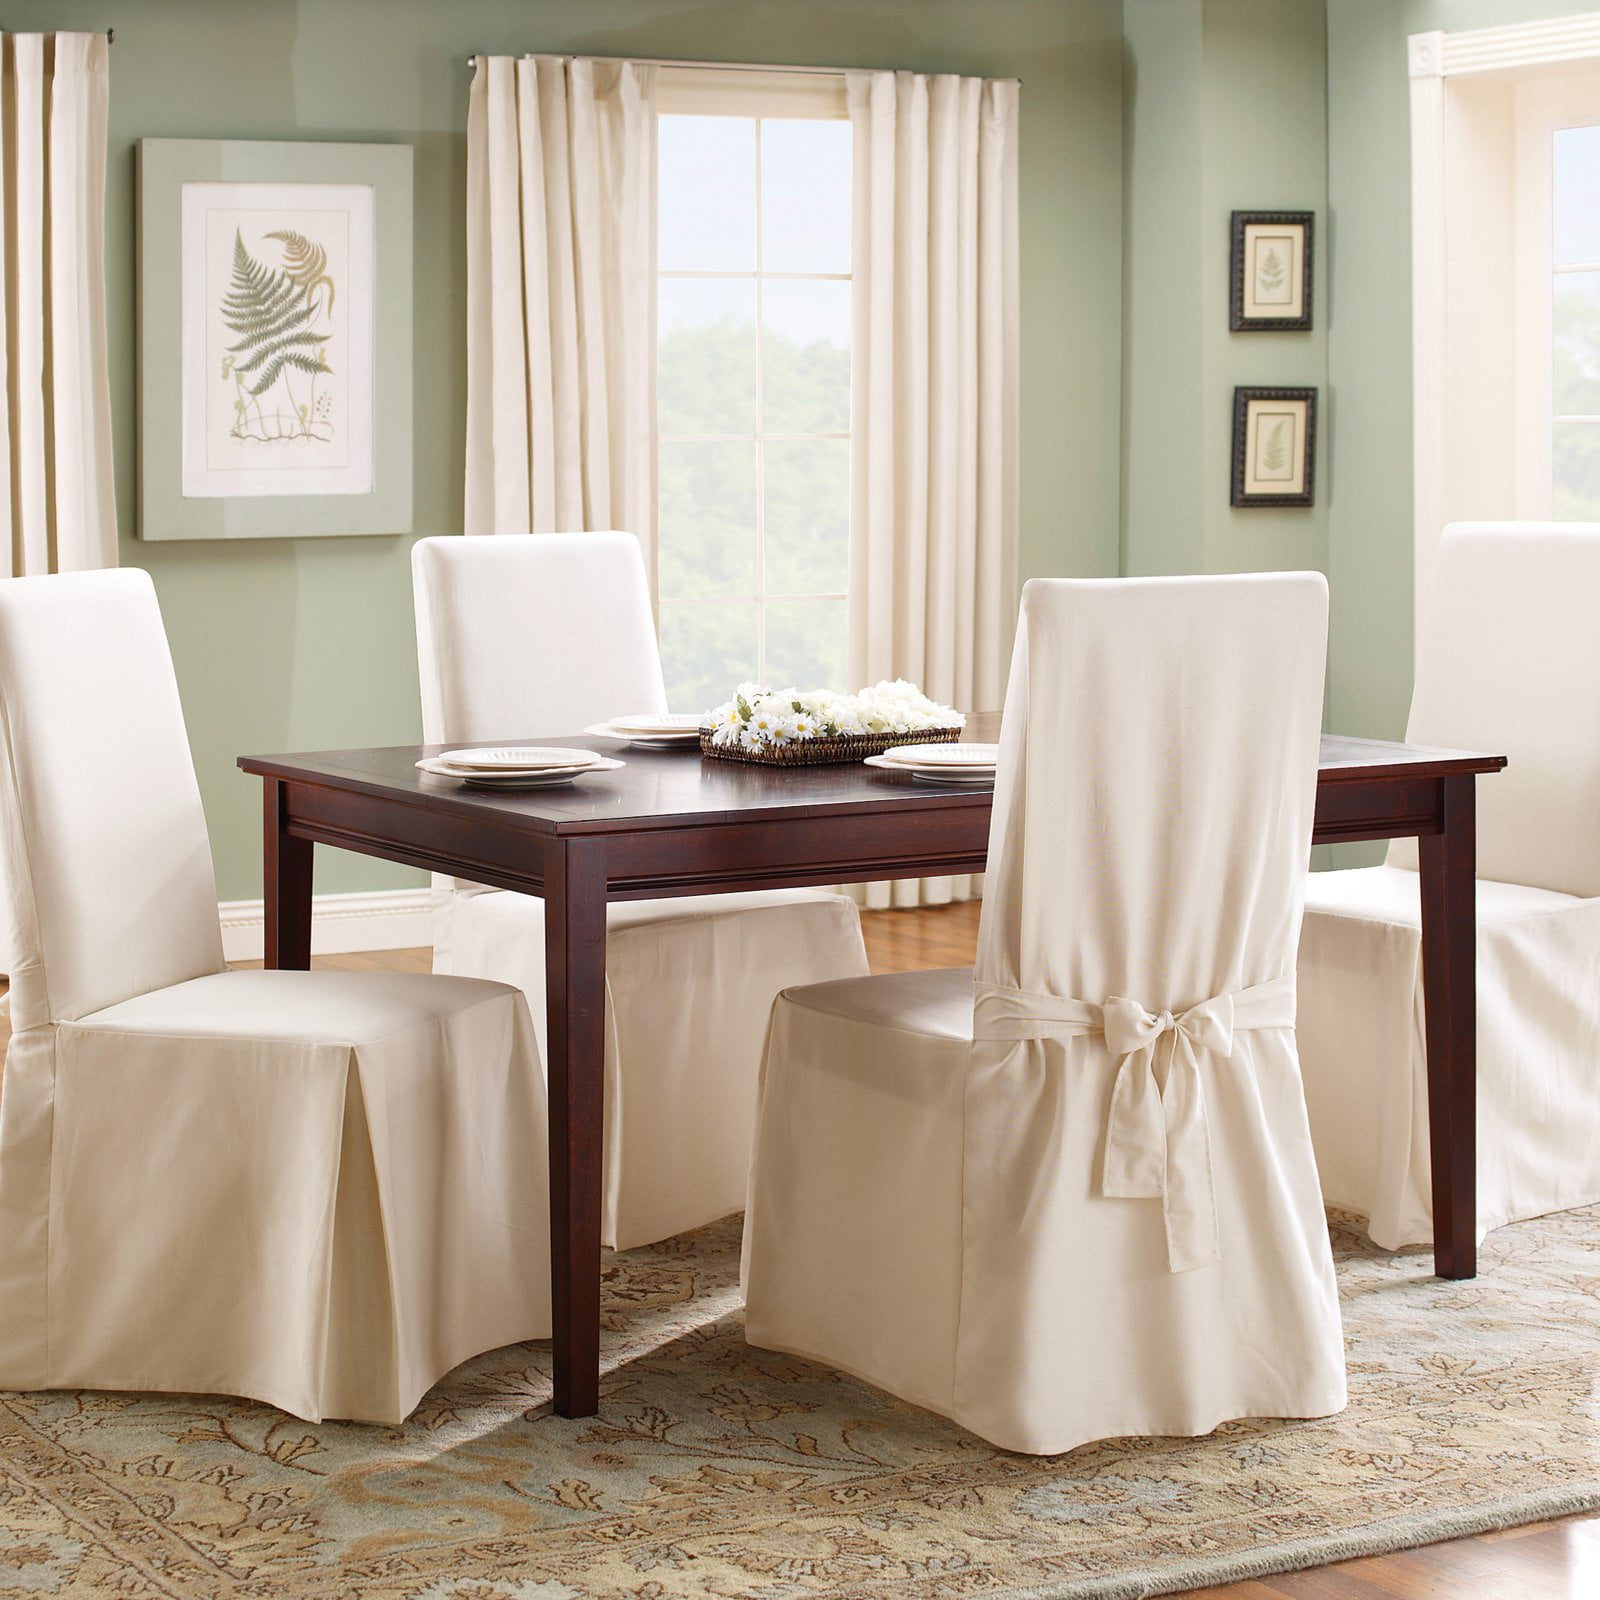 Sure Fit 100 Cotton Duck Full Length Dining Room Chair Slipcover Natural for sale online 